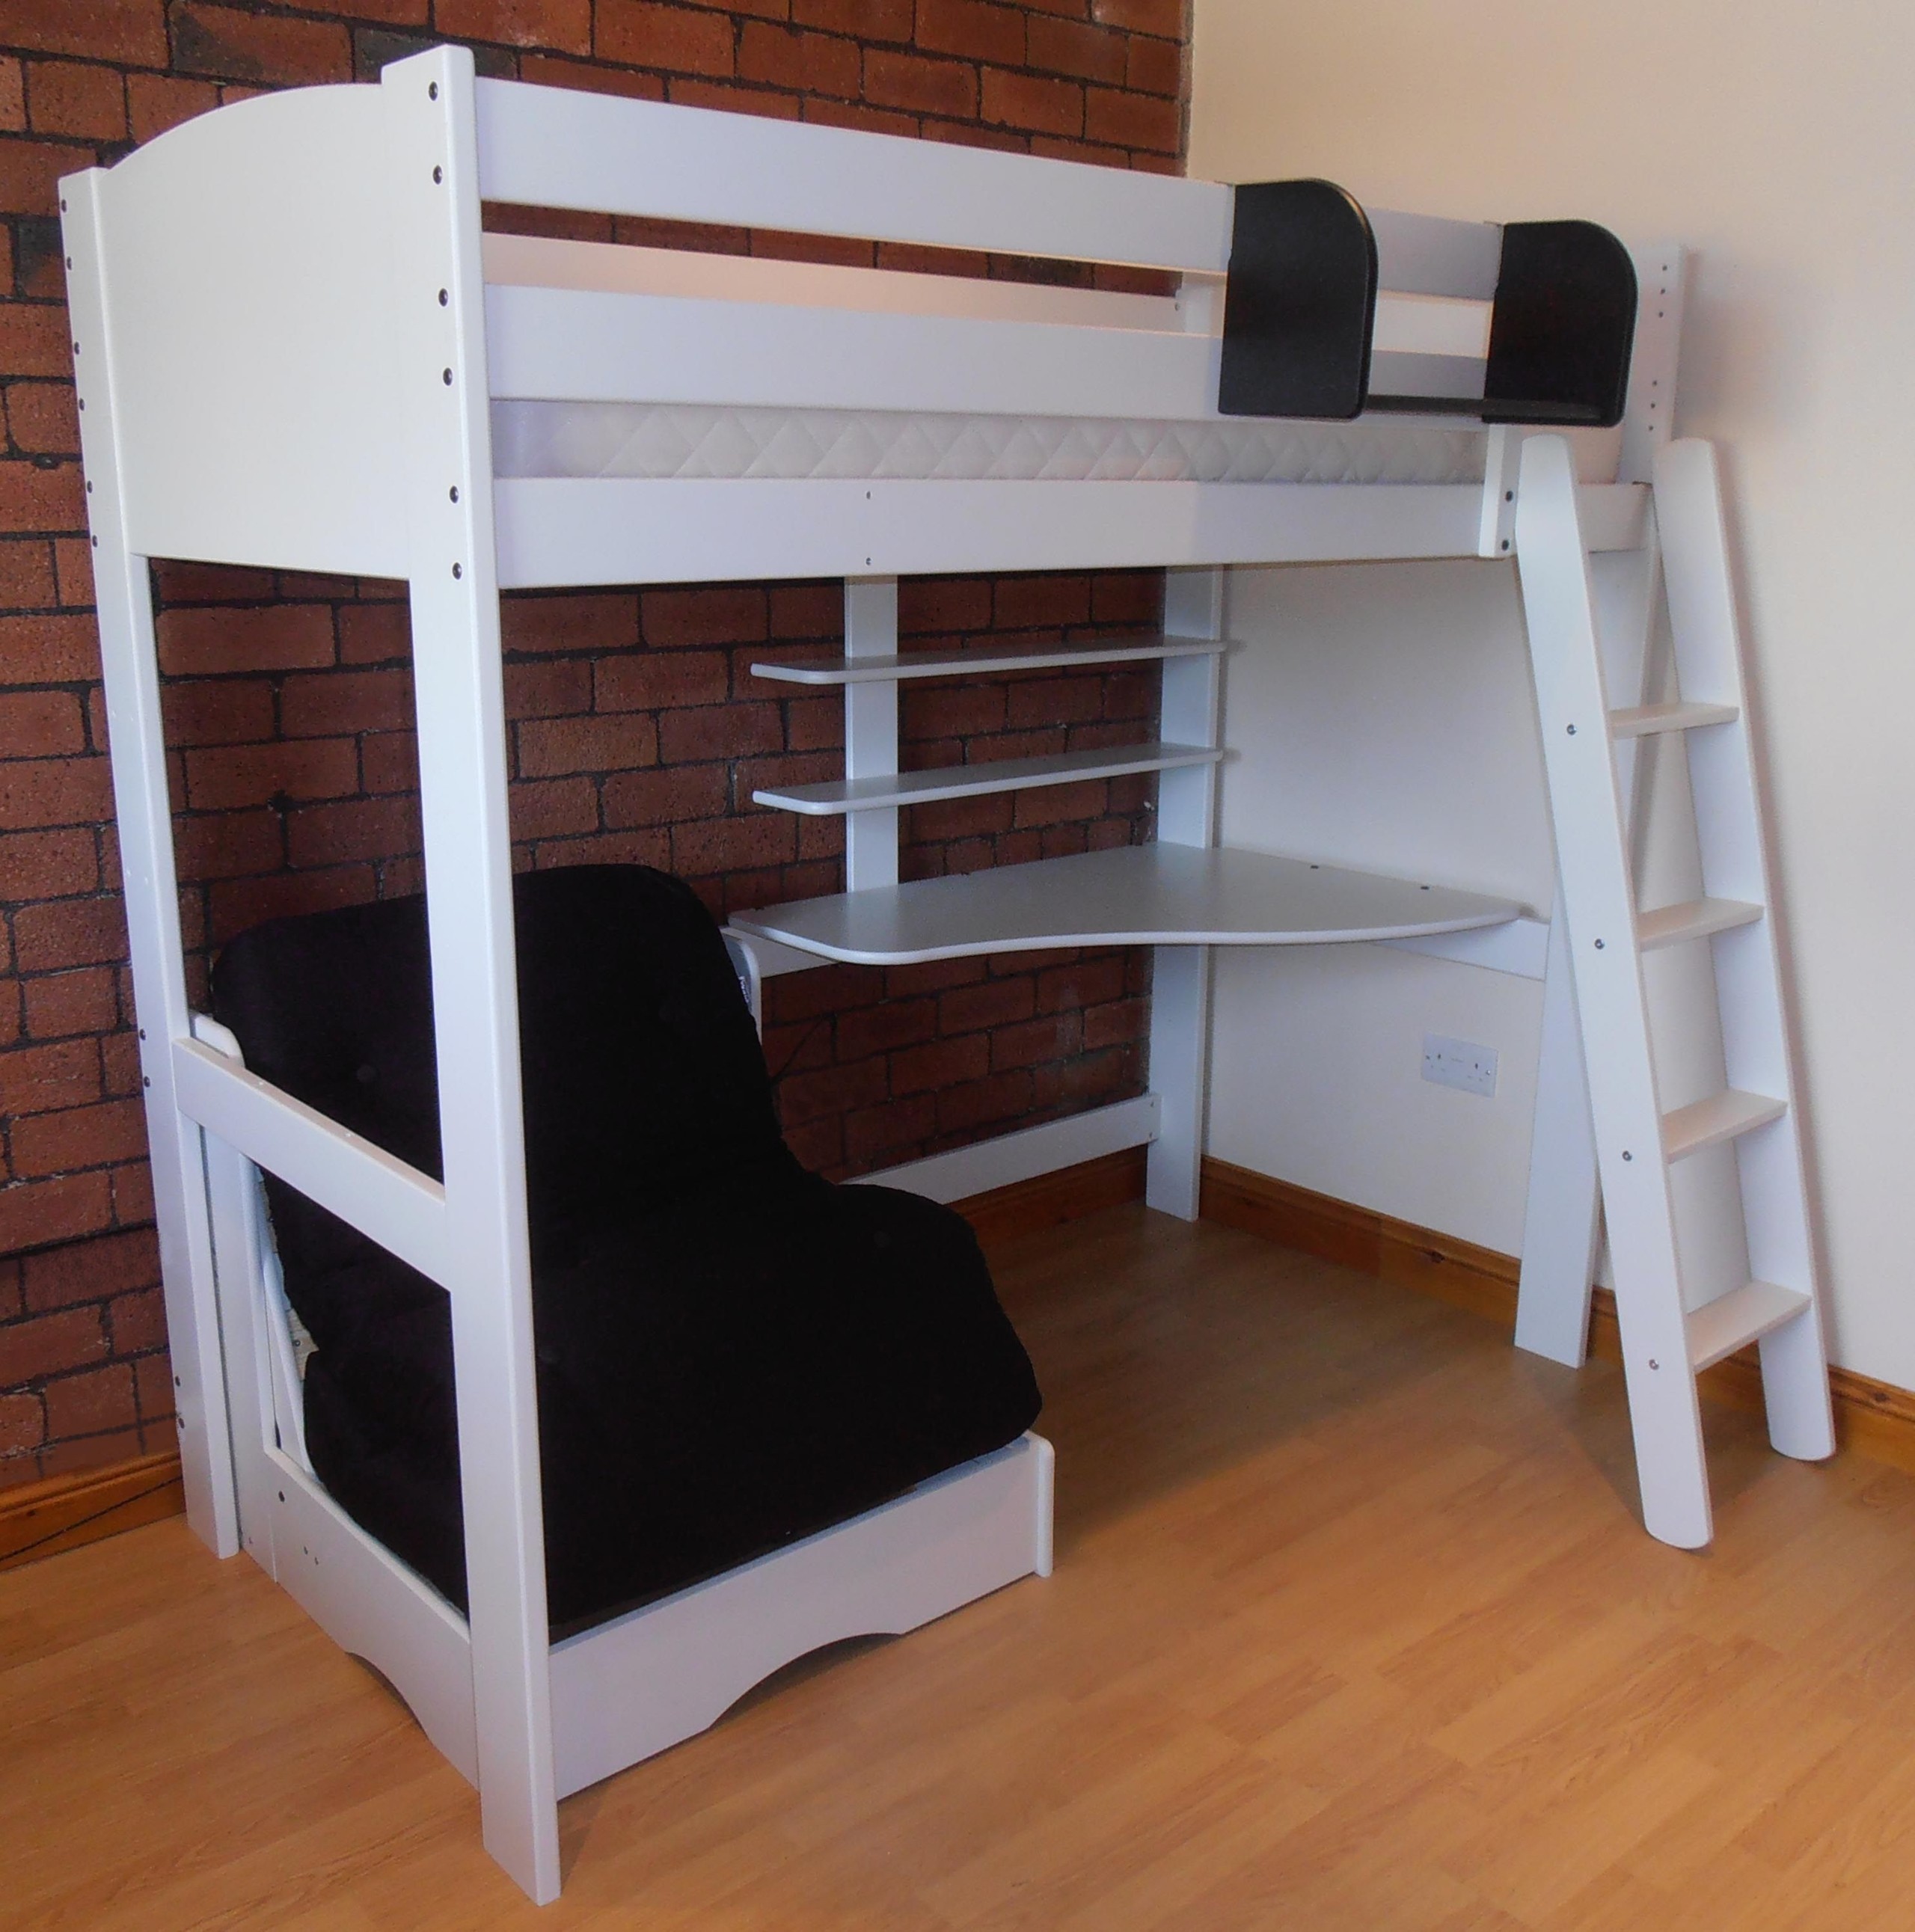 Childrens bunk beds with desk and futon